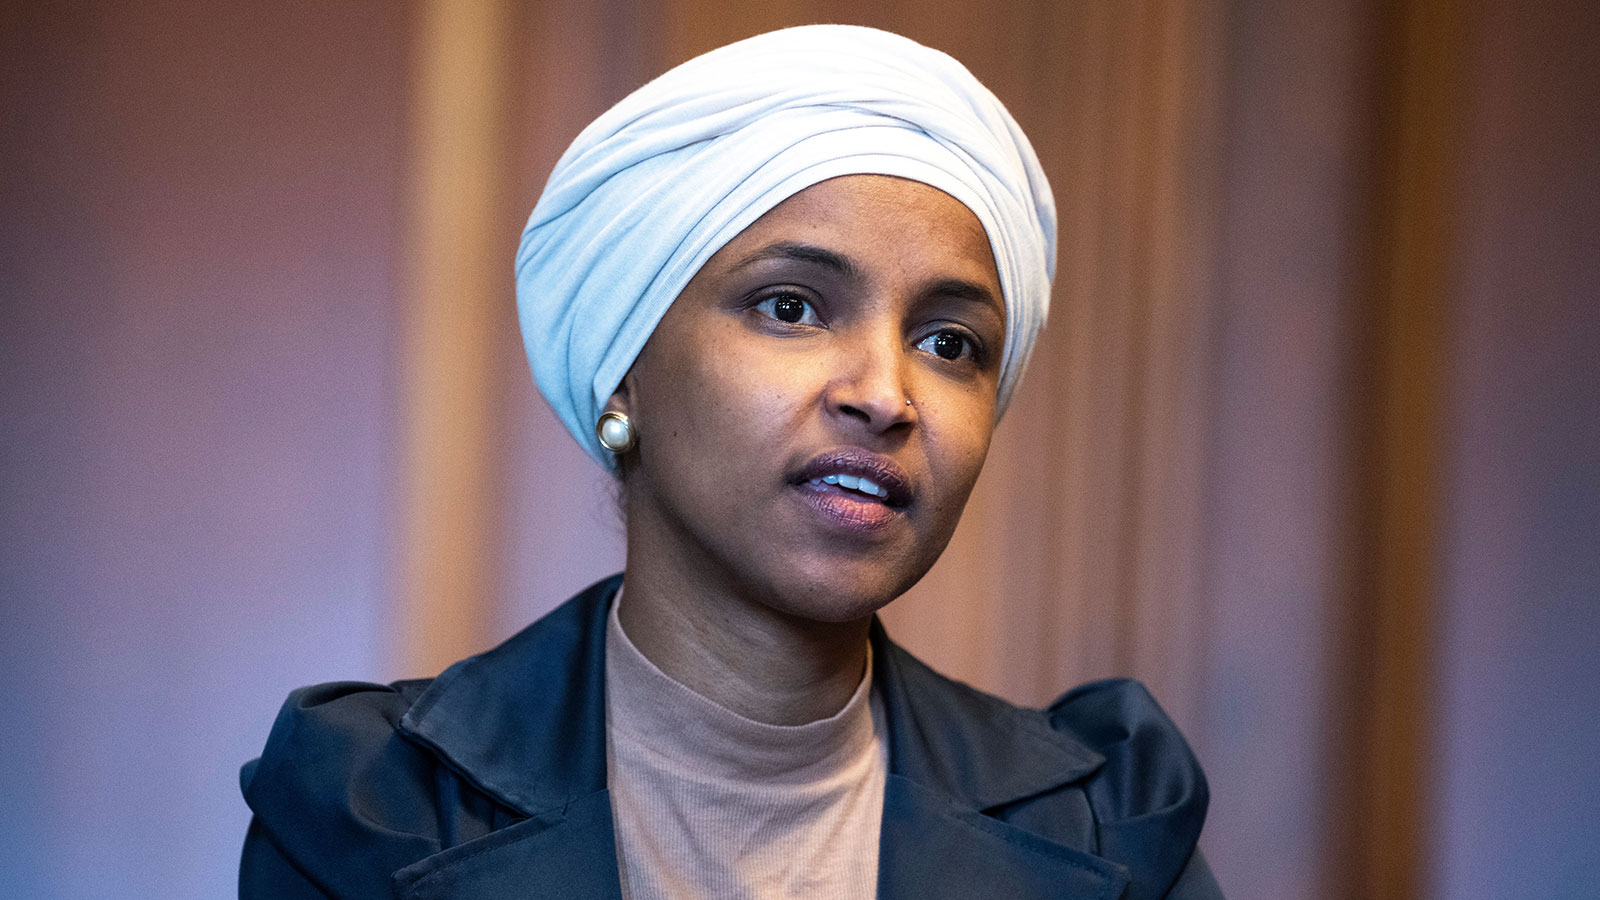 Rep. Ilhan Omar: Accountability for Russia means abandoning U.S. ‘Hypocrisy’